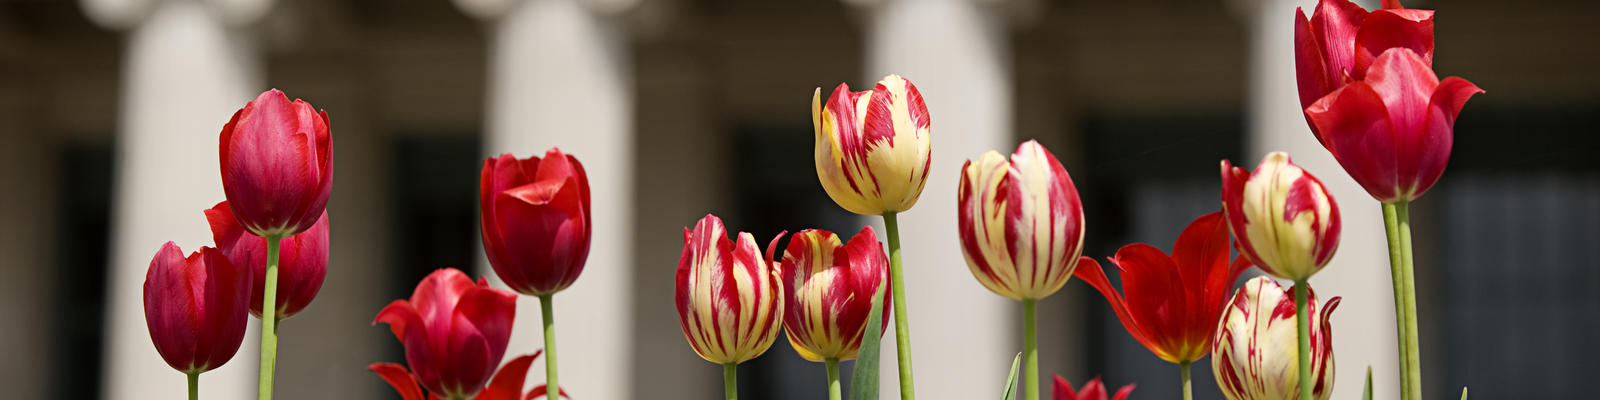 Several tulips are in full bloom in front of a traditional, Roman-style building with pillars.